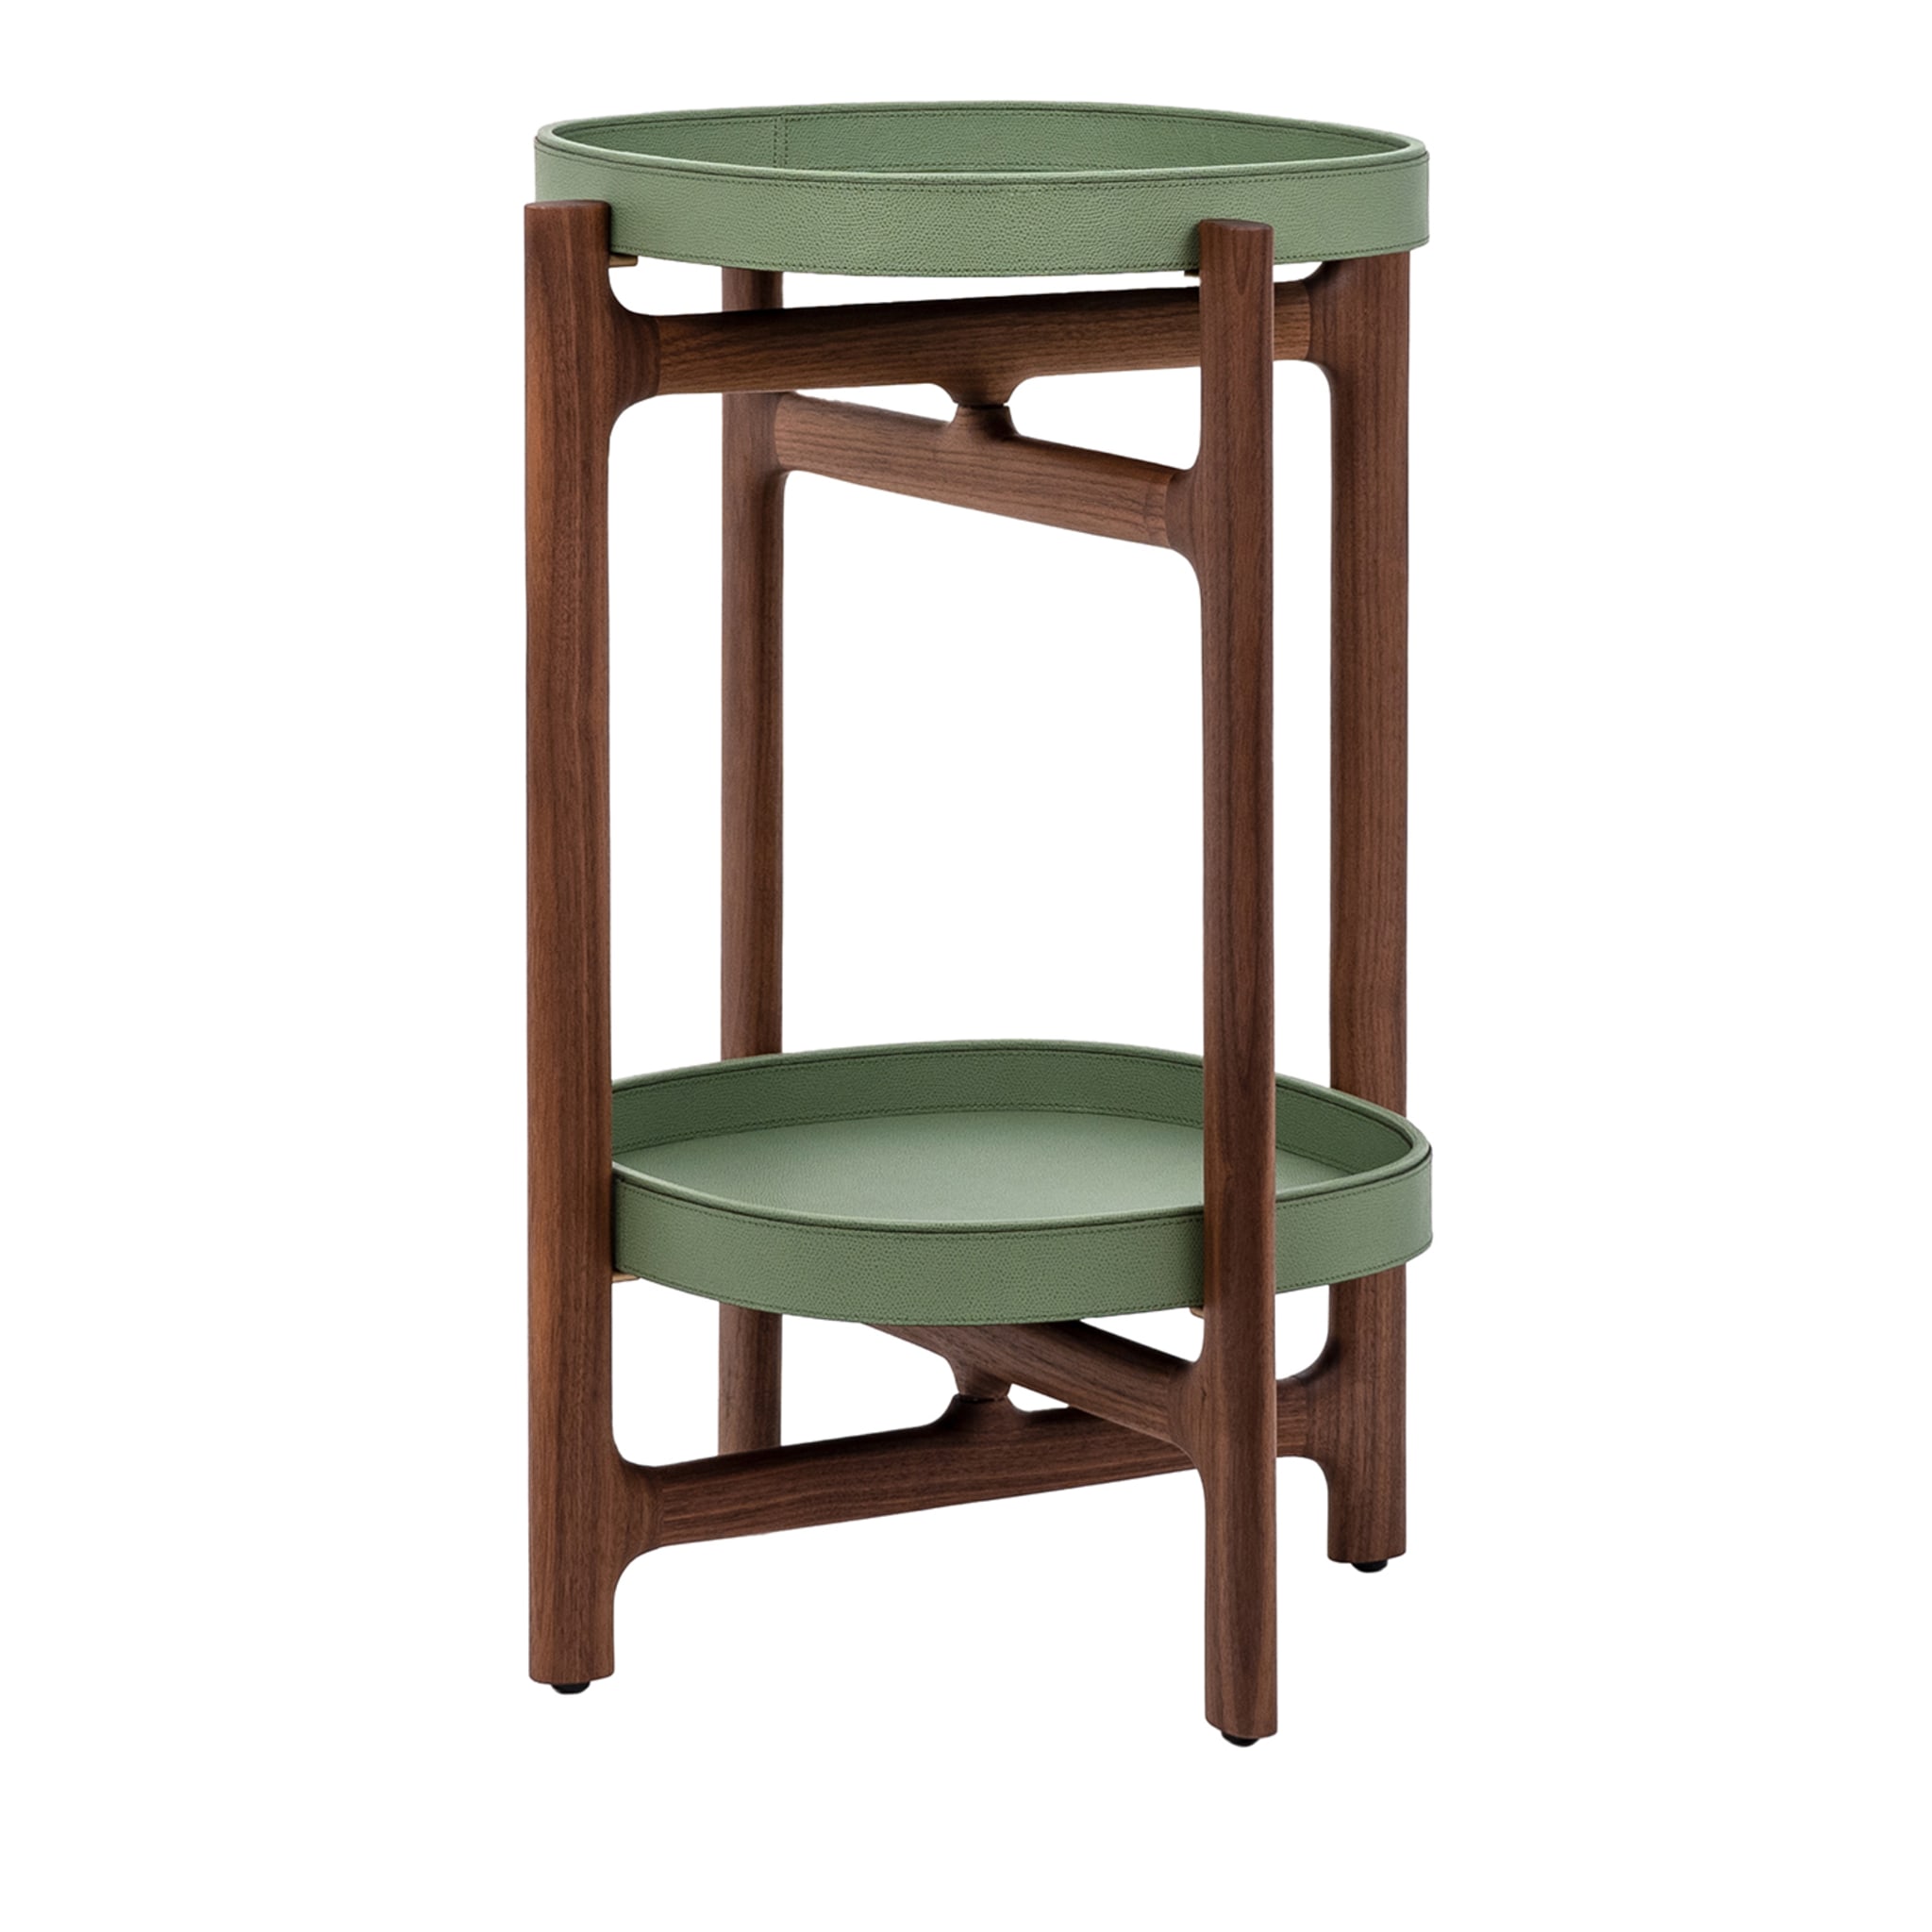 Chelsea Small Green Folding Table - Main view